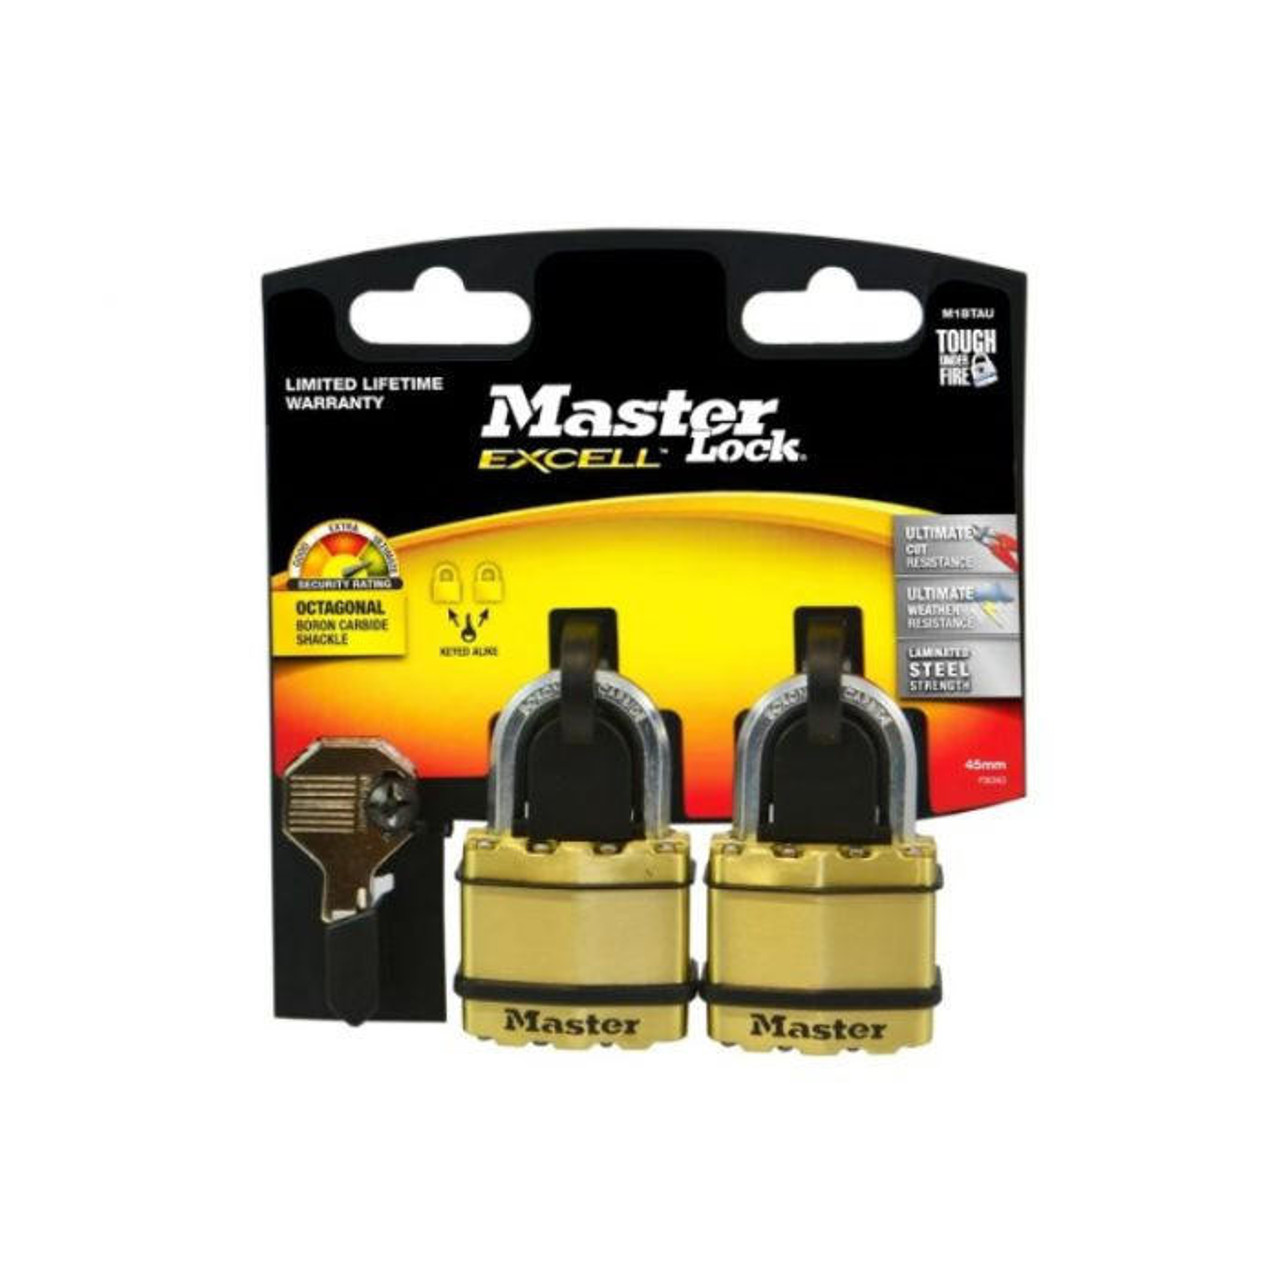 Master Lock Master Excell Padlock Twin Pack 45mm Shackle - M1BTAU